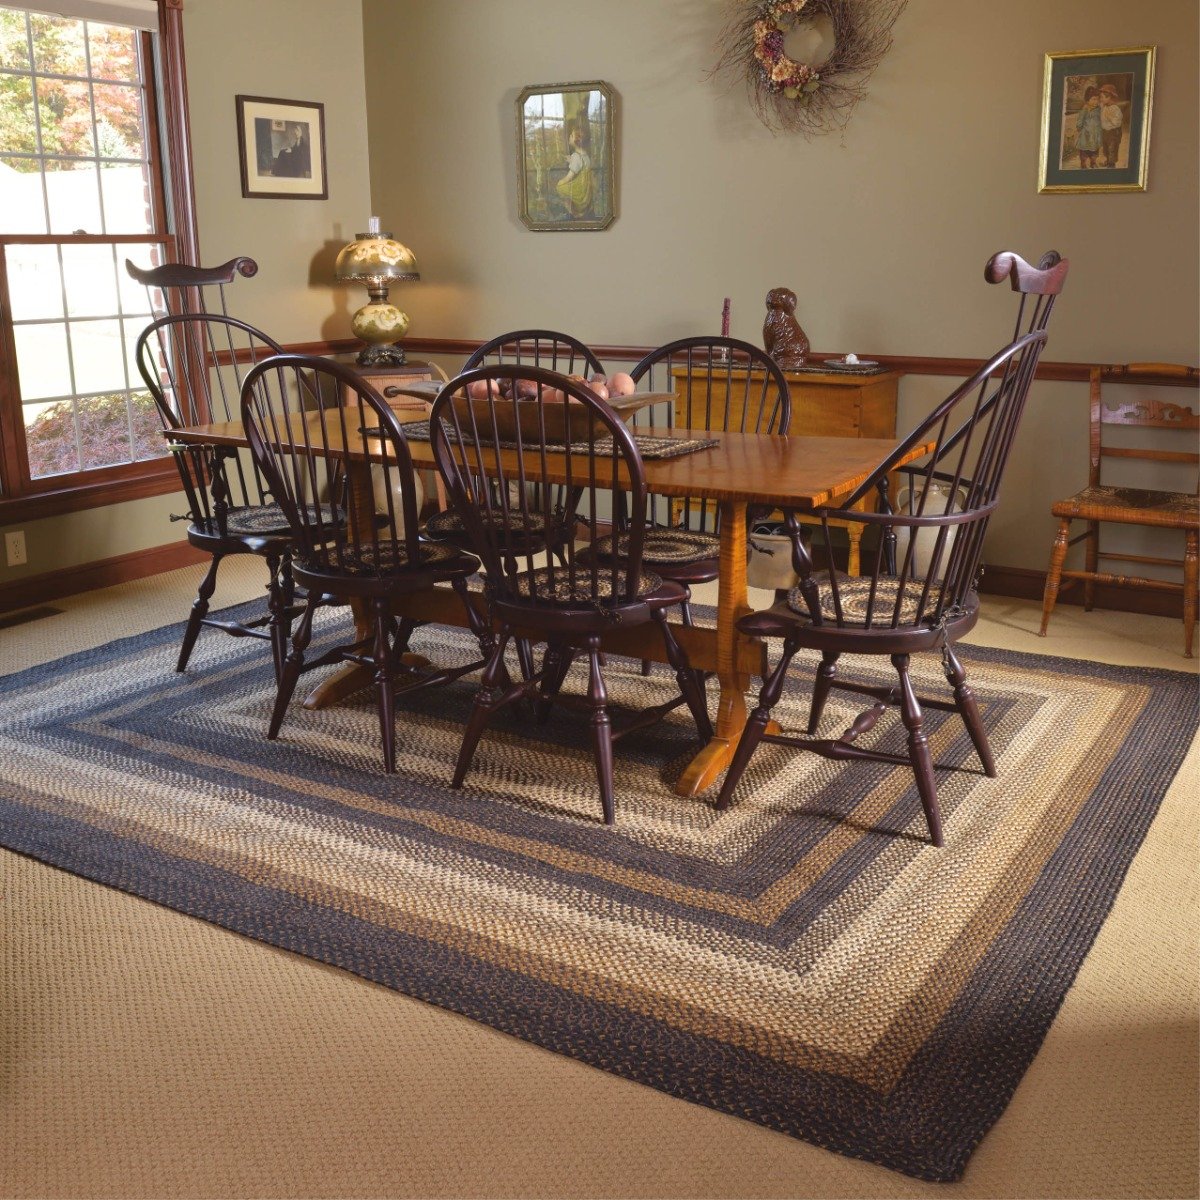 Rustic Reversible Jute Rug Natural Color Braided Jute Carpet For Home  Living Room 3x5 Feet Style From Liyaozan66, $143.49